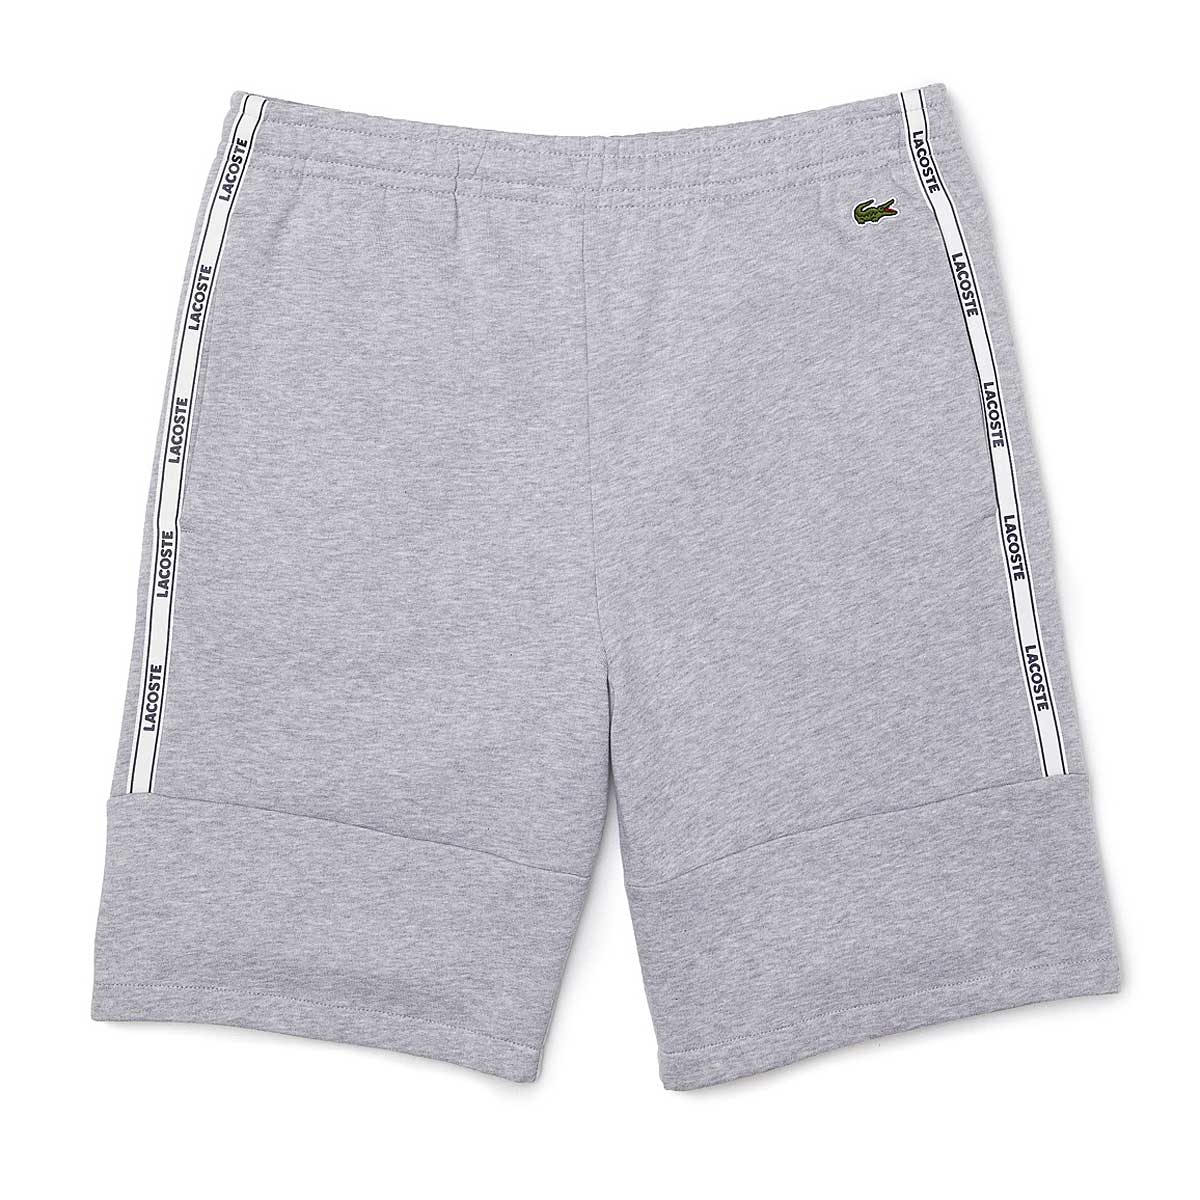 Lacoste Taping Short, Silver Chine